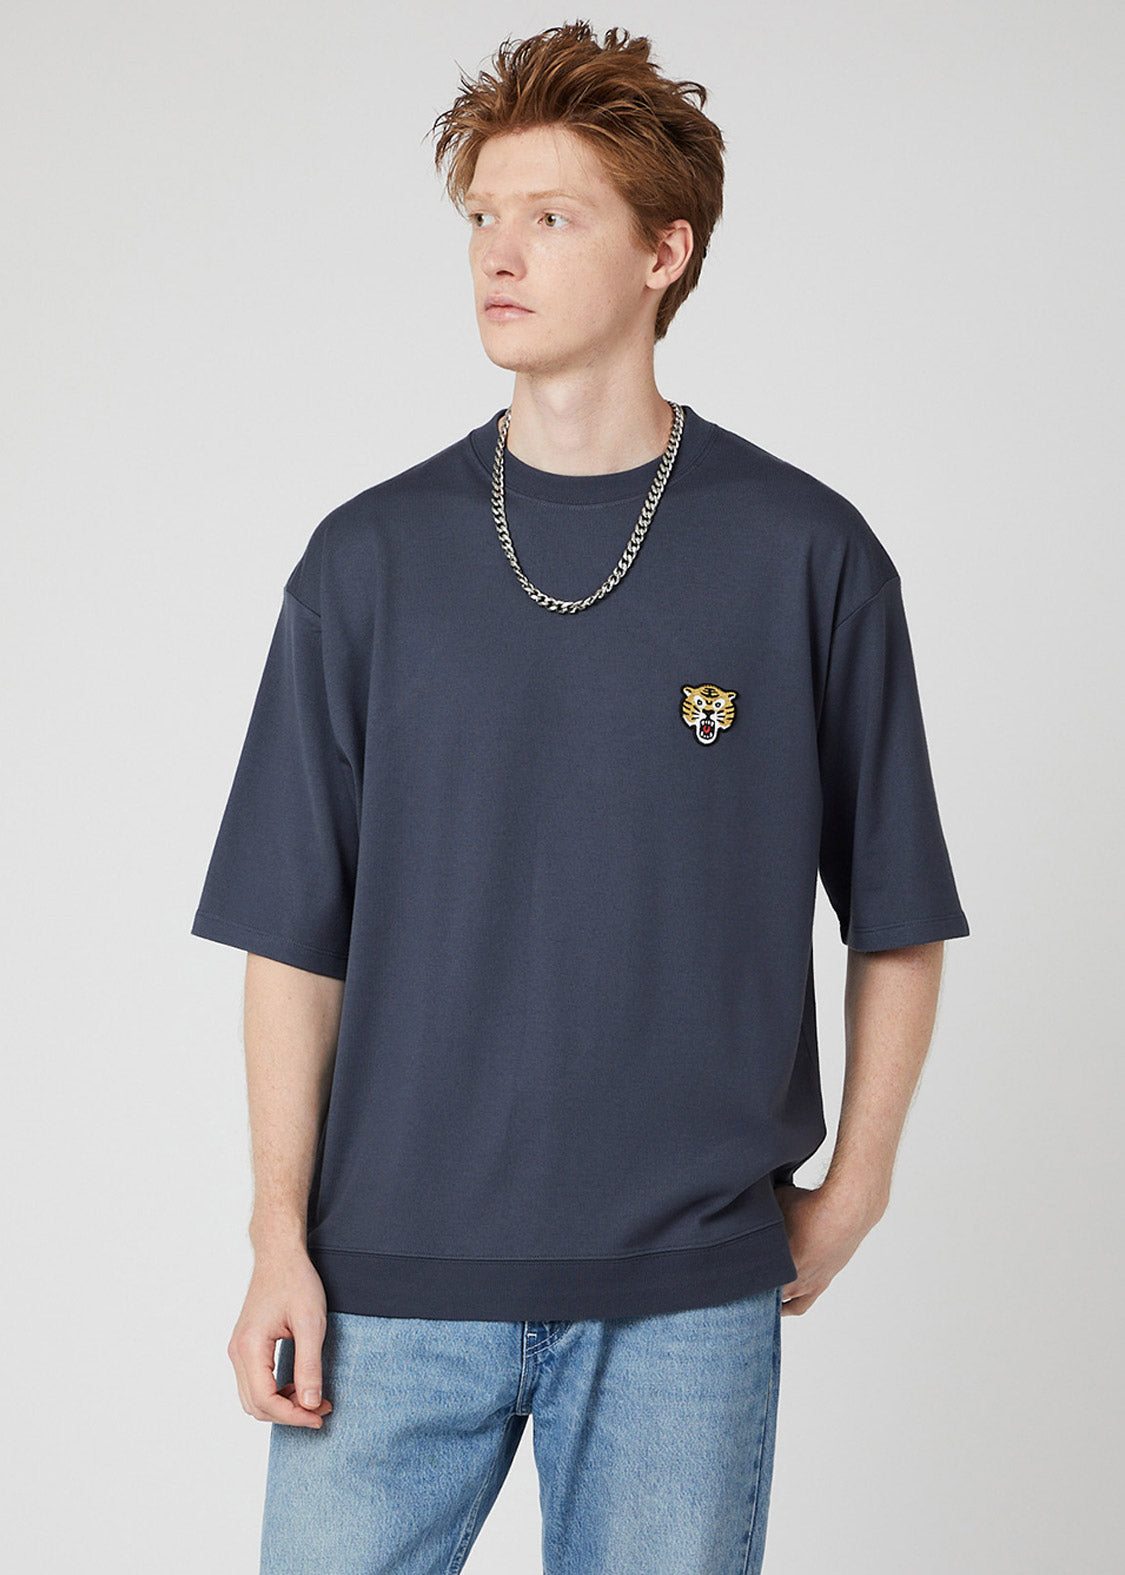 Heavy Weight Half Sleeve Tee (Awesome Tiger College)